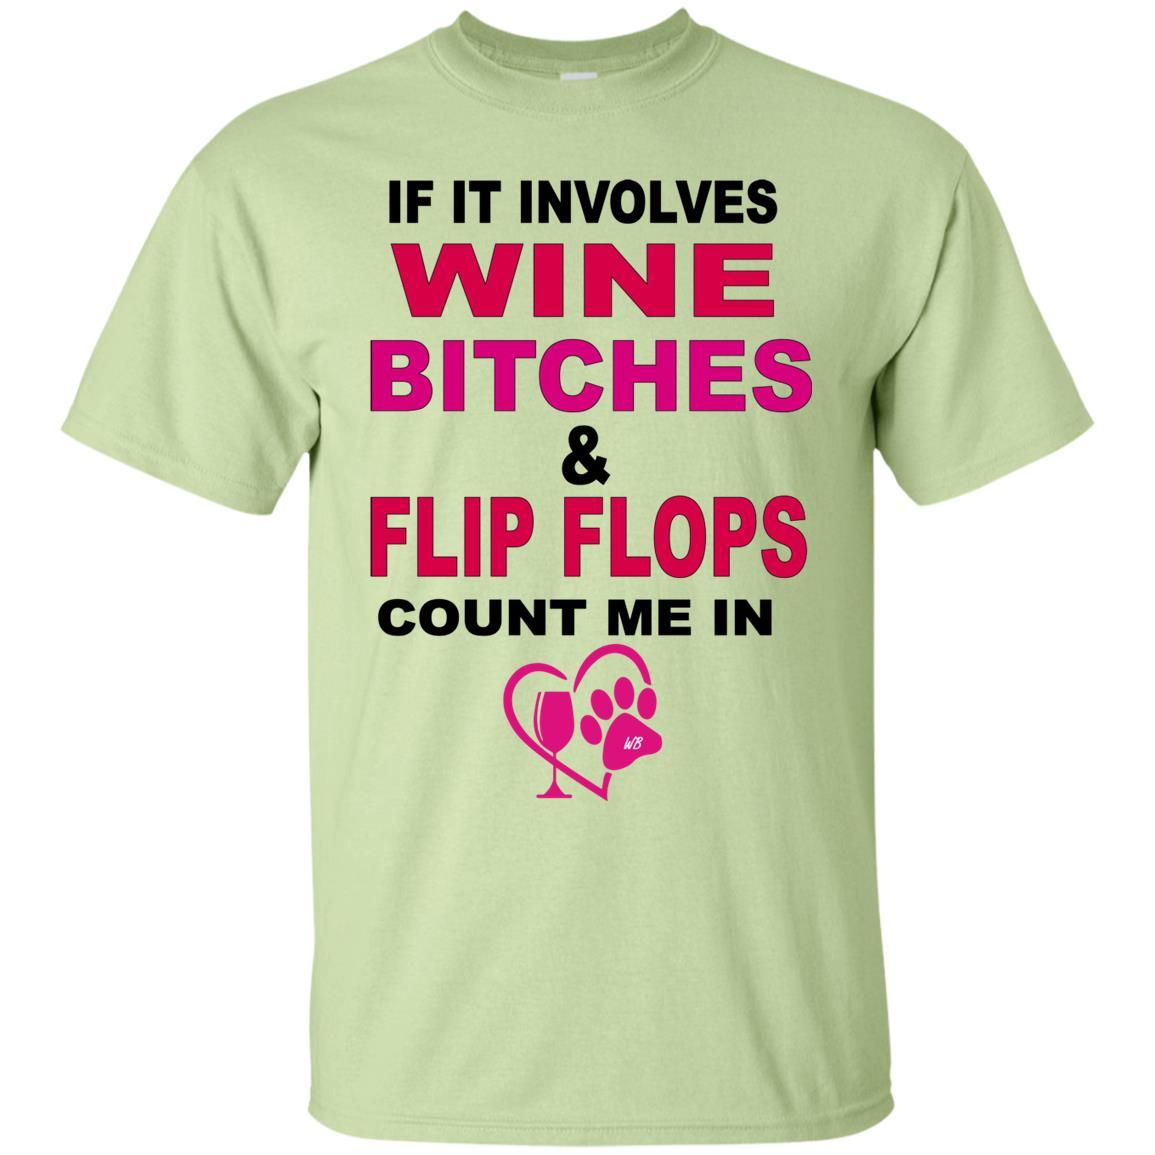 T-Shirts Pistachio / S WineyBitches.co " If It Involves Wine Bitches & Flip Flops I'm In" Ultra Cotton Unisex T-Shirt WineyBitches.co Hilariously Funny T-Shirt for Wine & Dog Lovers   WineyBitchesCo